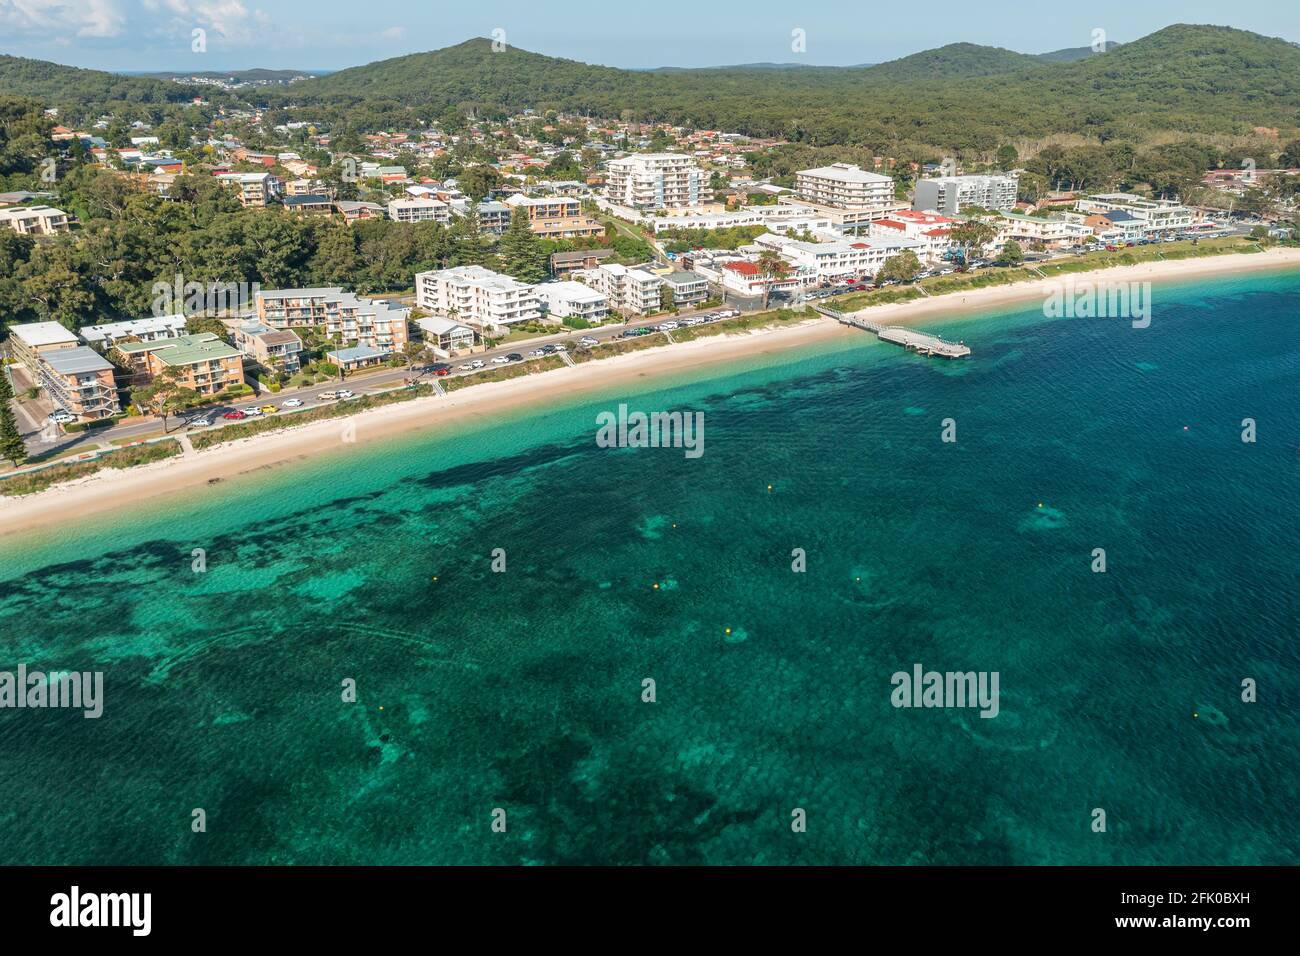 Aerial view of Shoal Bay foreshore, wharf and town centre with the aqua waters of Port Stephens, Australia. Stock Photo